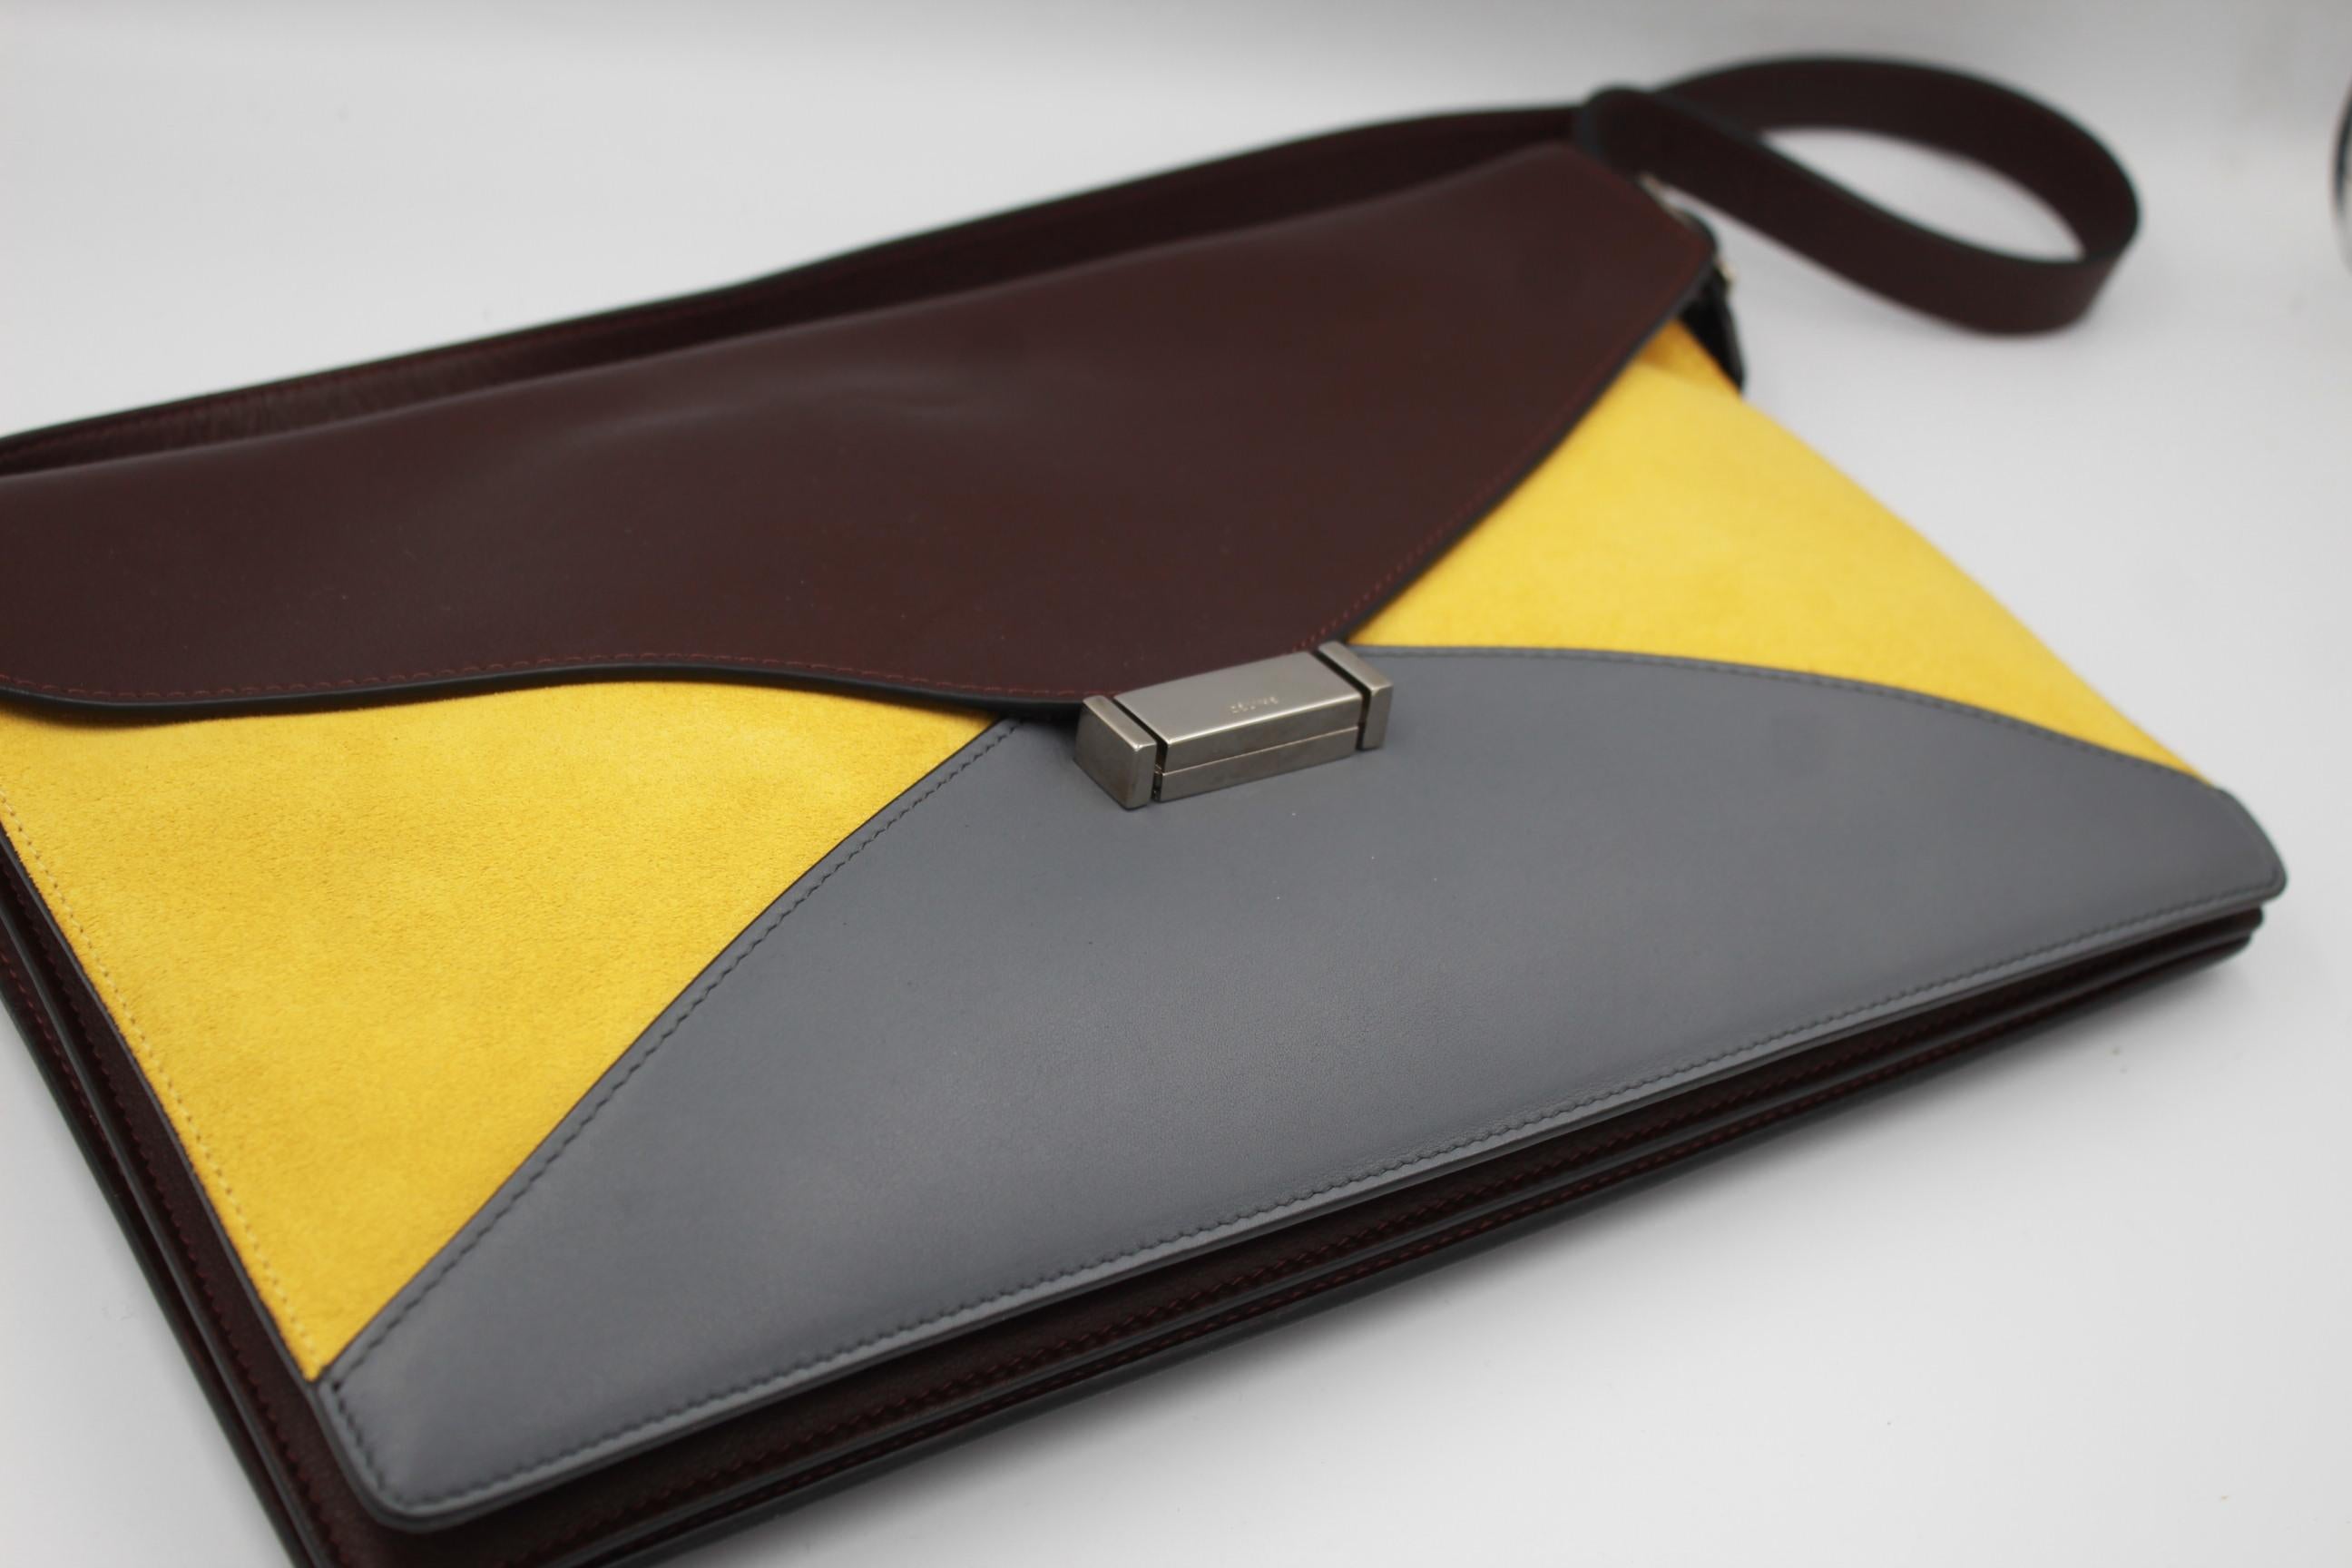 Celineshoulder bag in broxn leather and yellow suede.
Good condition, just some light signs of use
With dust bag
Size 32x21